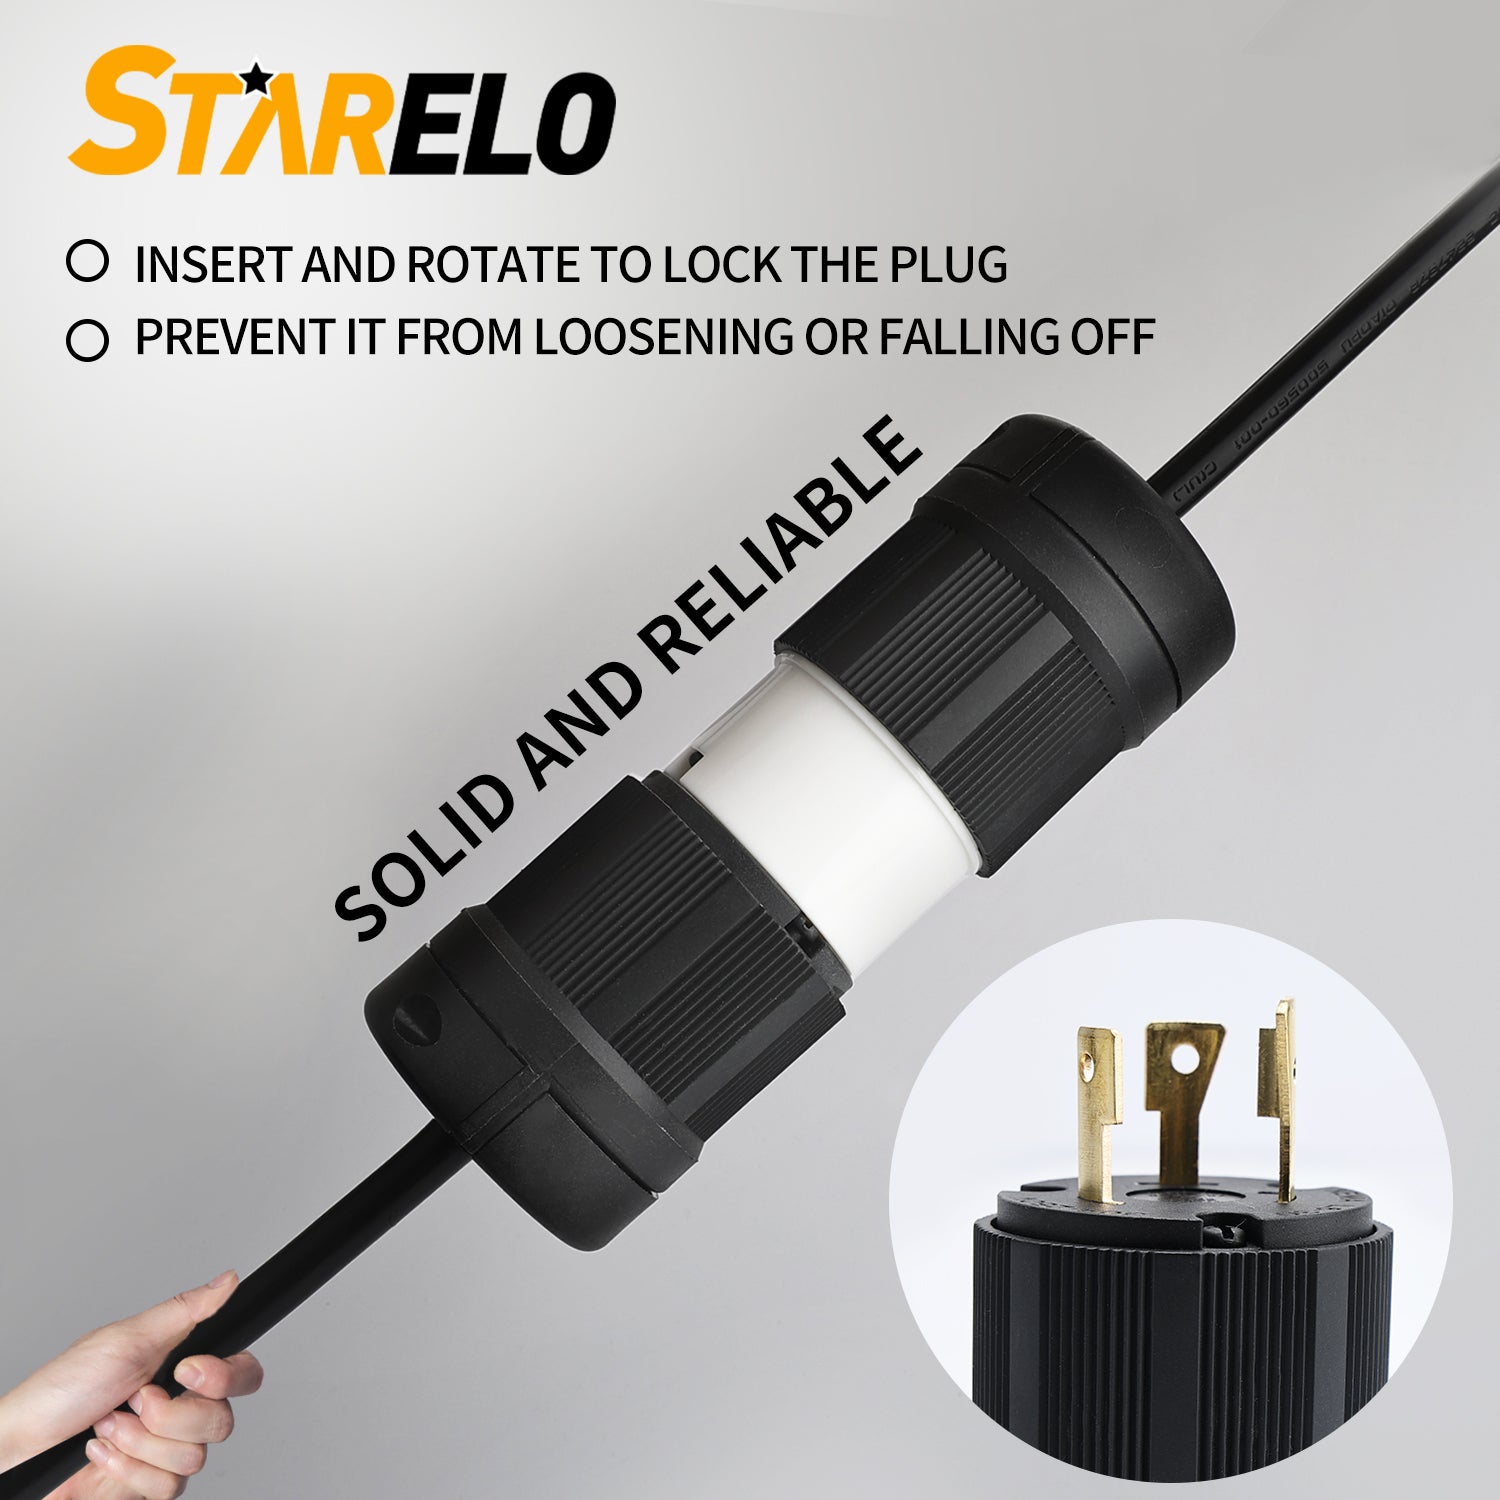 STARELO Locking Plug for Generator NEMA L6-30P Extension Cord End Male Plug 30A 250V 2 Pole 3 Wire Grounding Electrical Replacement Plug Industrial Grade UL Listed (NEMA L6-30P)